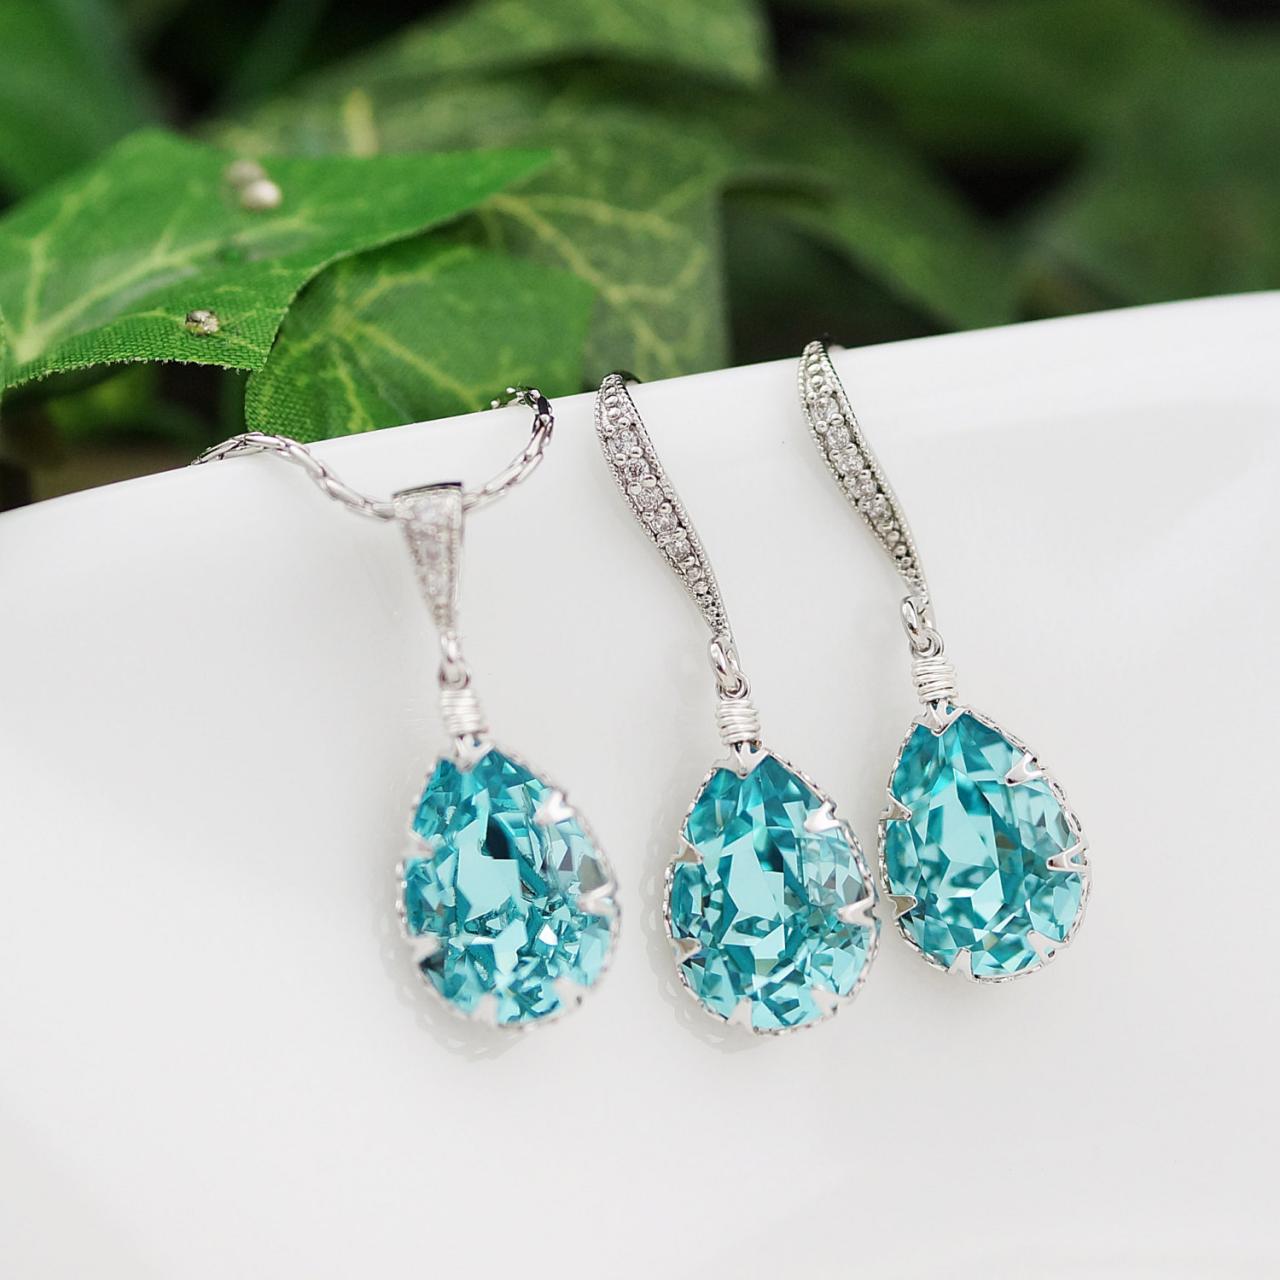 Wedding Jewelry Bridesmaid Gifts Bridesmaid Earrings Bridesmaid Necklace Light Turquoise Swarovski Crystal Tear Drops Bridal Jewelry Set